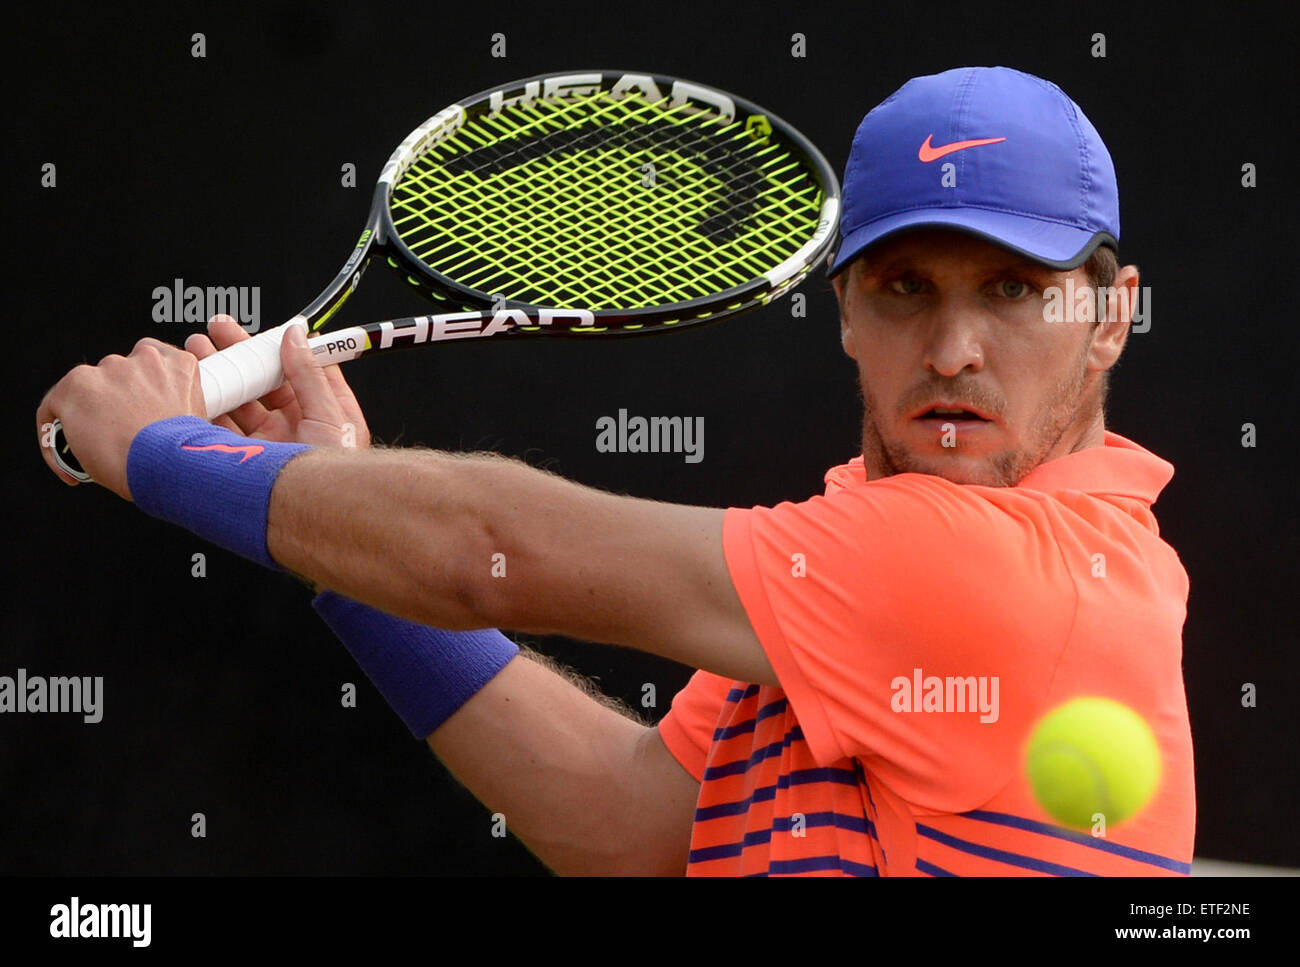 Stuttgart, Germany. 12th June, 2015. Mischa Zverev of Germany plays a  backhand during the quarter final of the ATP tennis tournament against  Cilic of Croatia in Stuttgart, Germany, 12 June 2015. PHOTO: